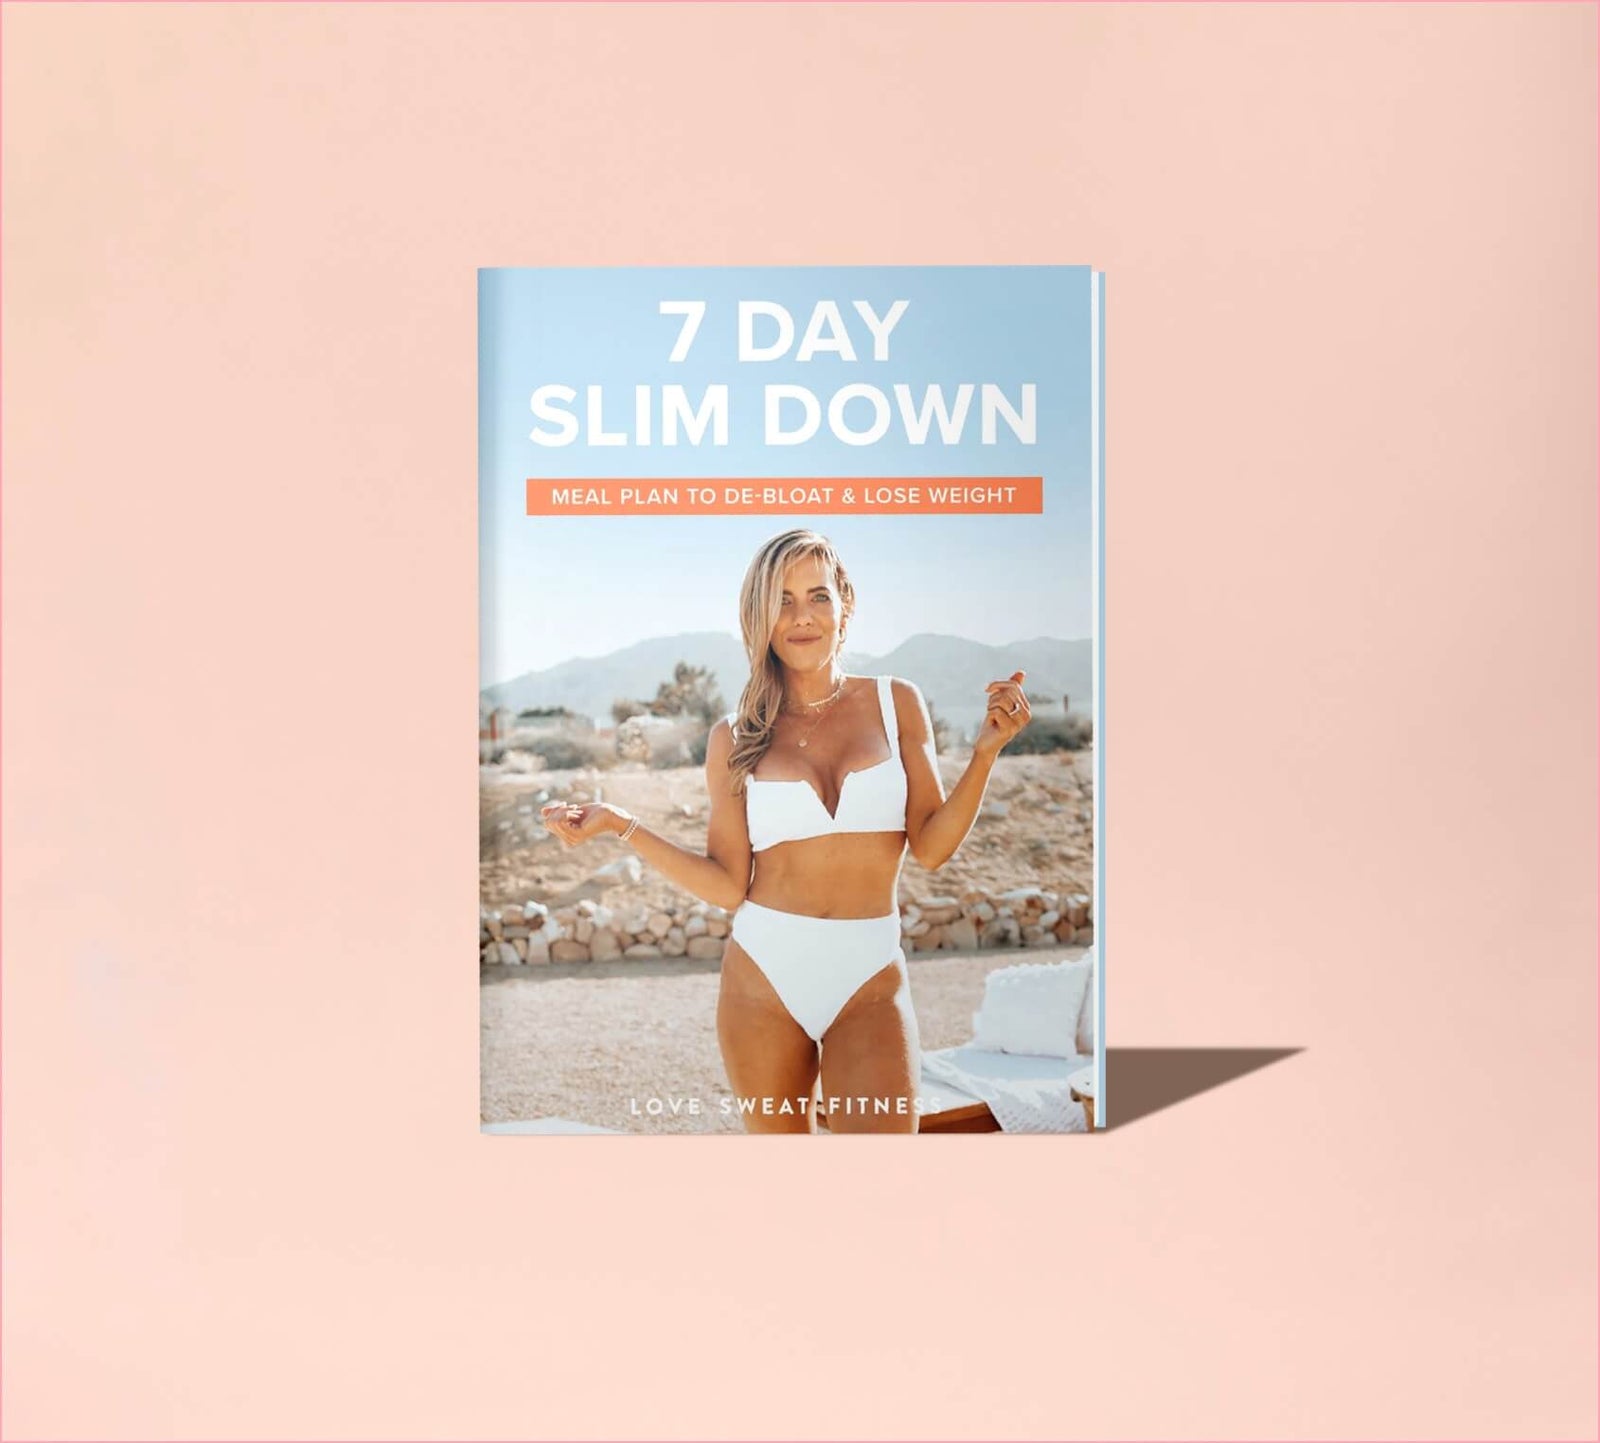 7 Day Slim Down Plan - For Weightloss